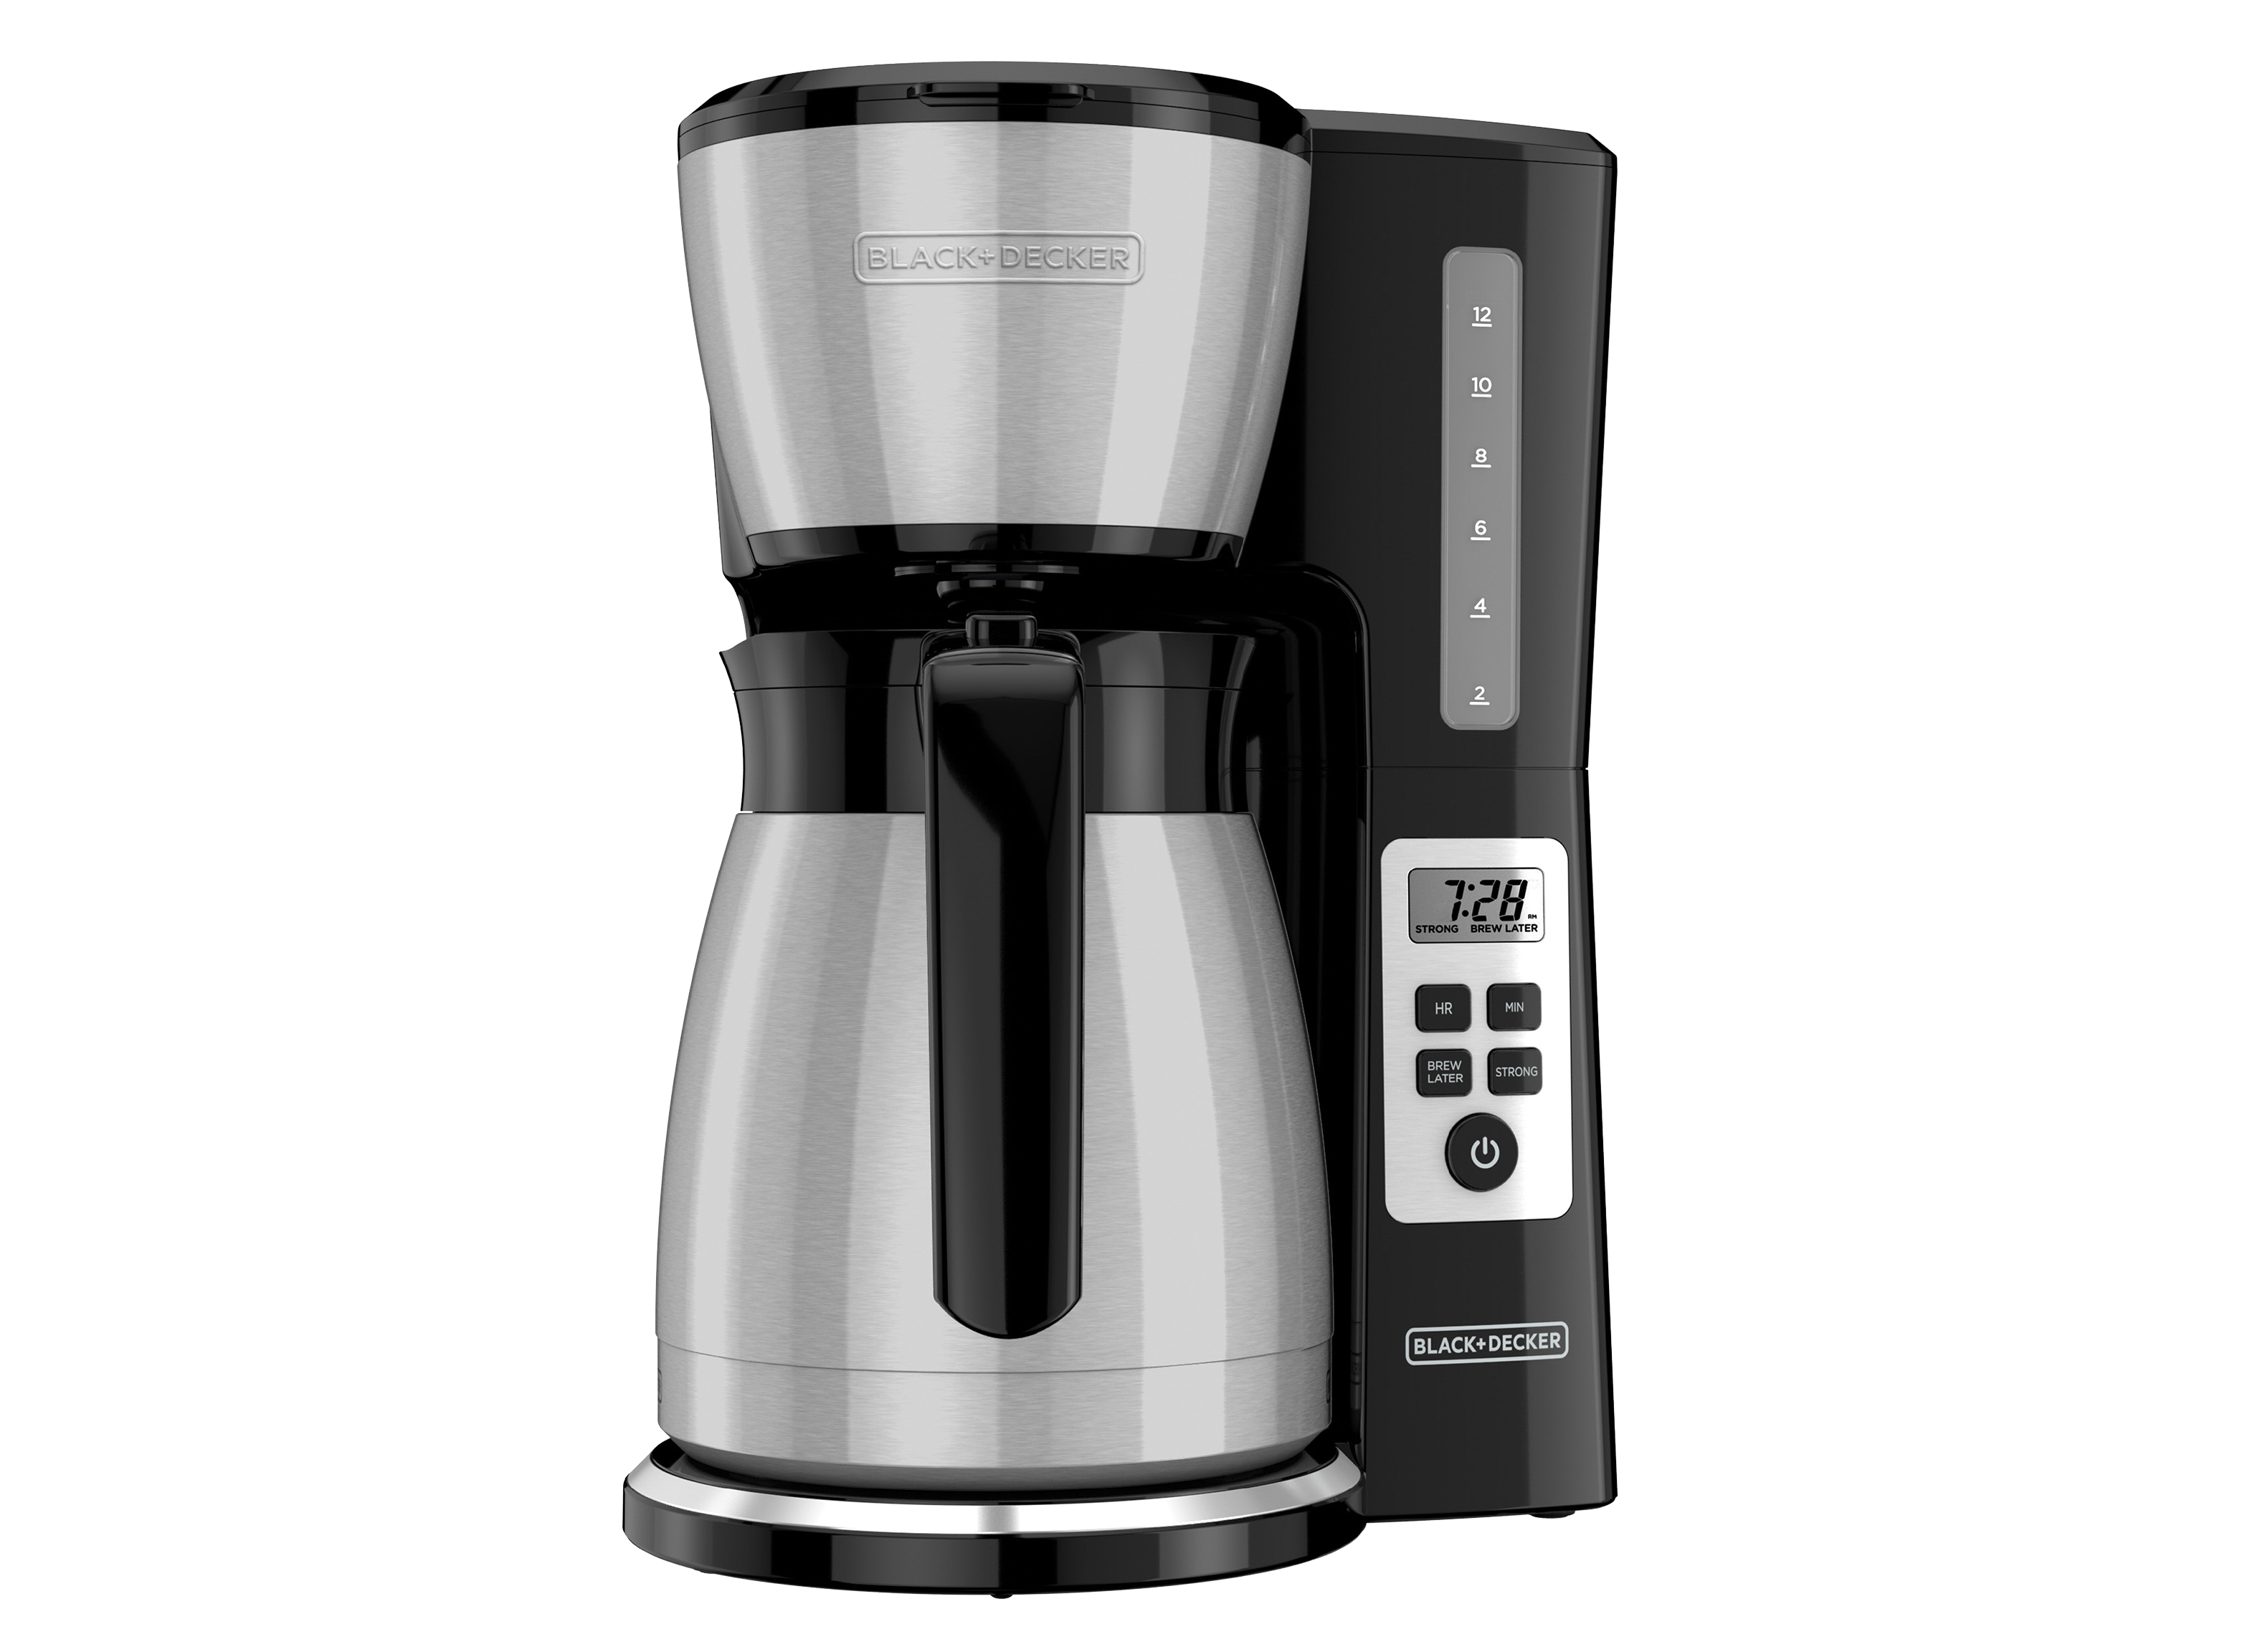 https://crdms.images.consumerreports.org/prod/products/cr/models/401340-drip-coffee-makers-with-carafe-black-decker-12-cup-thermal-programmable-cm2046s-10013063.png